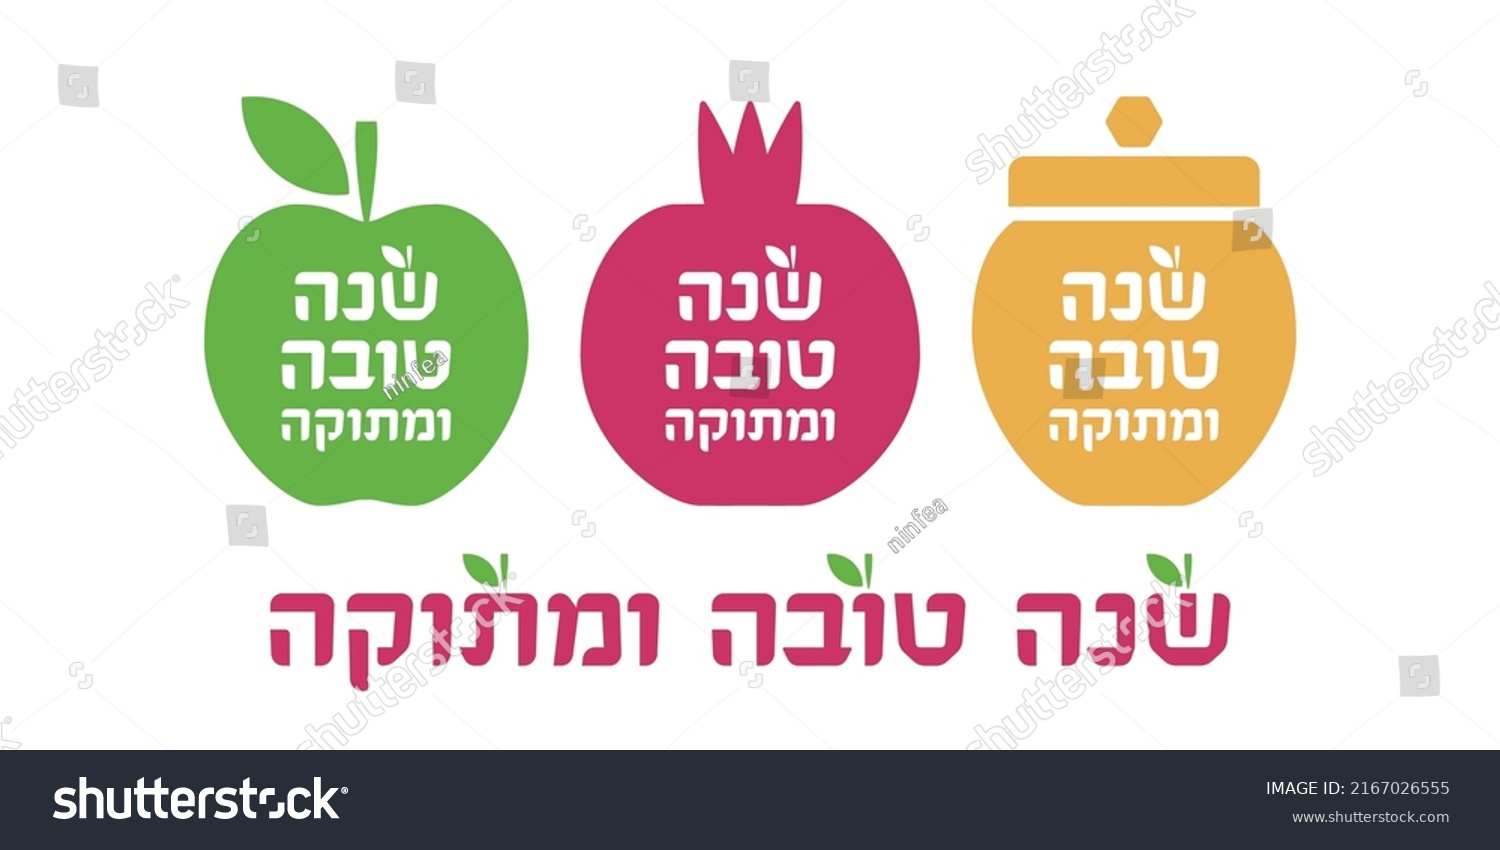 Rosh Hashanah wishes - Happy and sweet new year in Hebrew. Shana Tova (Jewish New Year) vector illustration. Hebrew typography lettering with apple, pomegranate, honey jar.  #2167026555